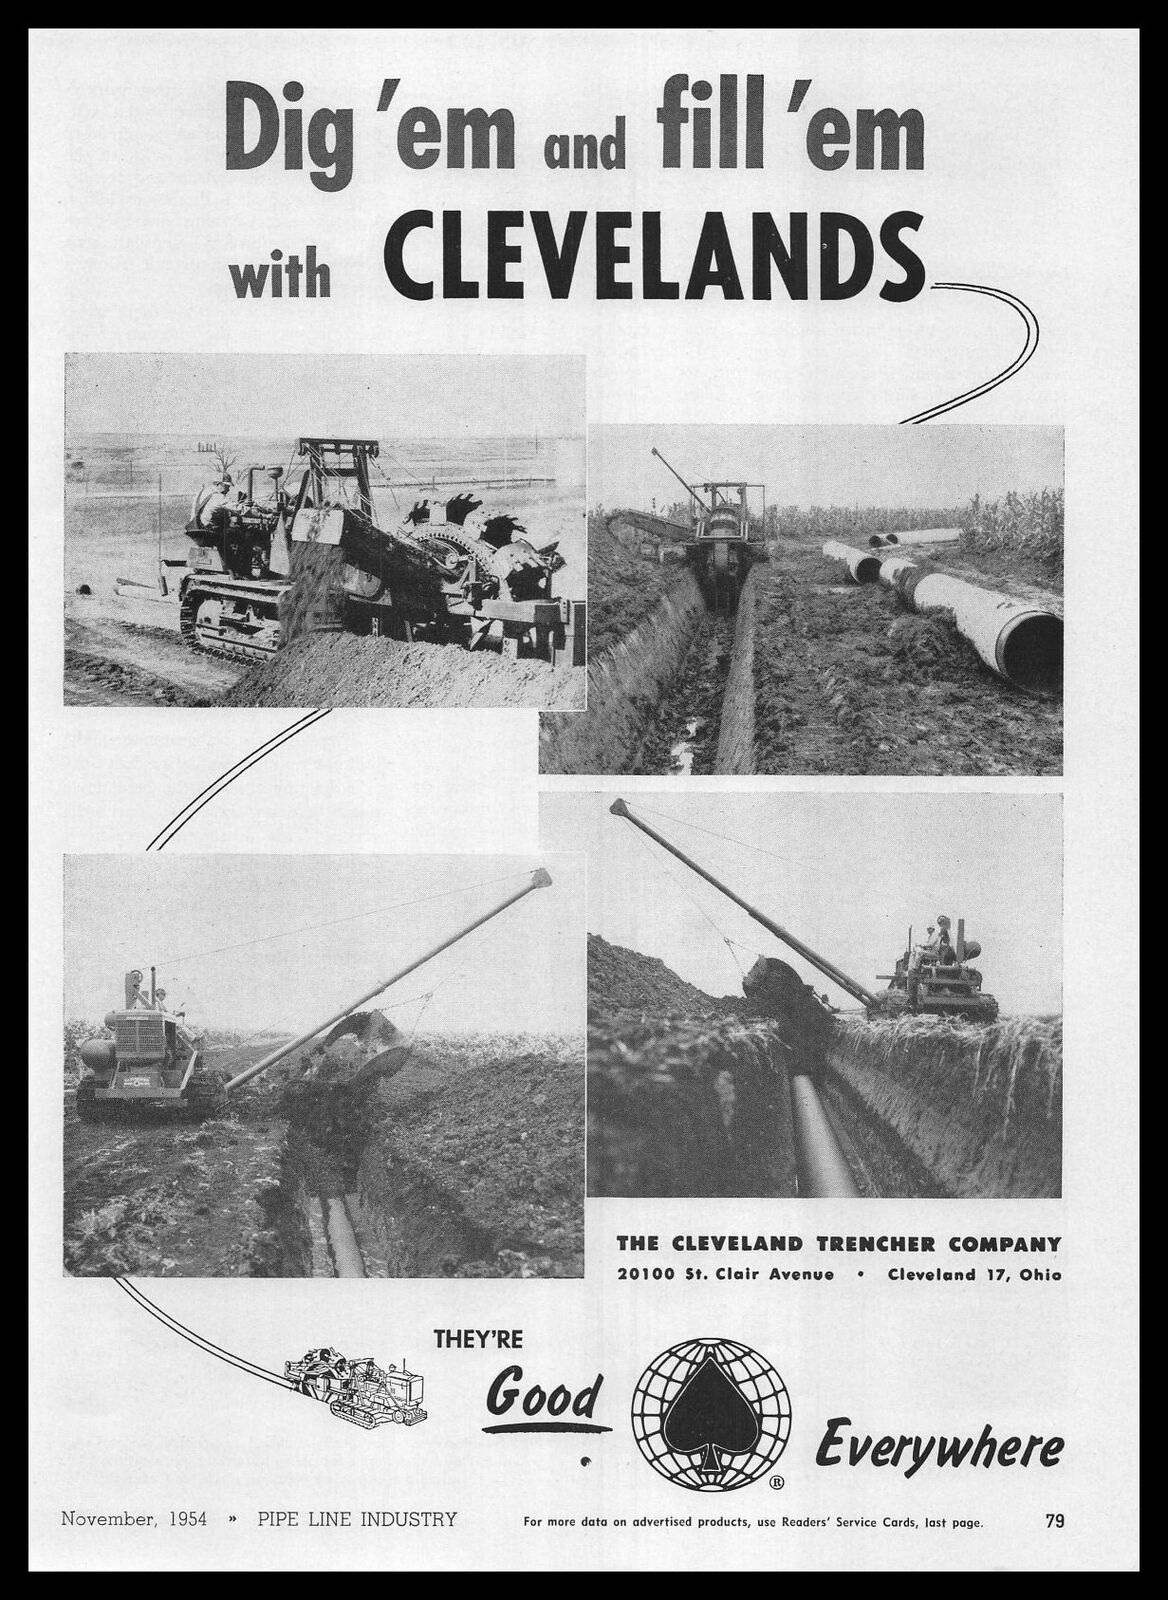 1954 Cleveland Trencher Company Pipe Line Job Site Work Photos Vintage Print Ad